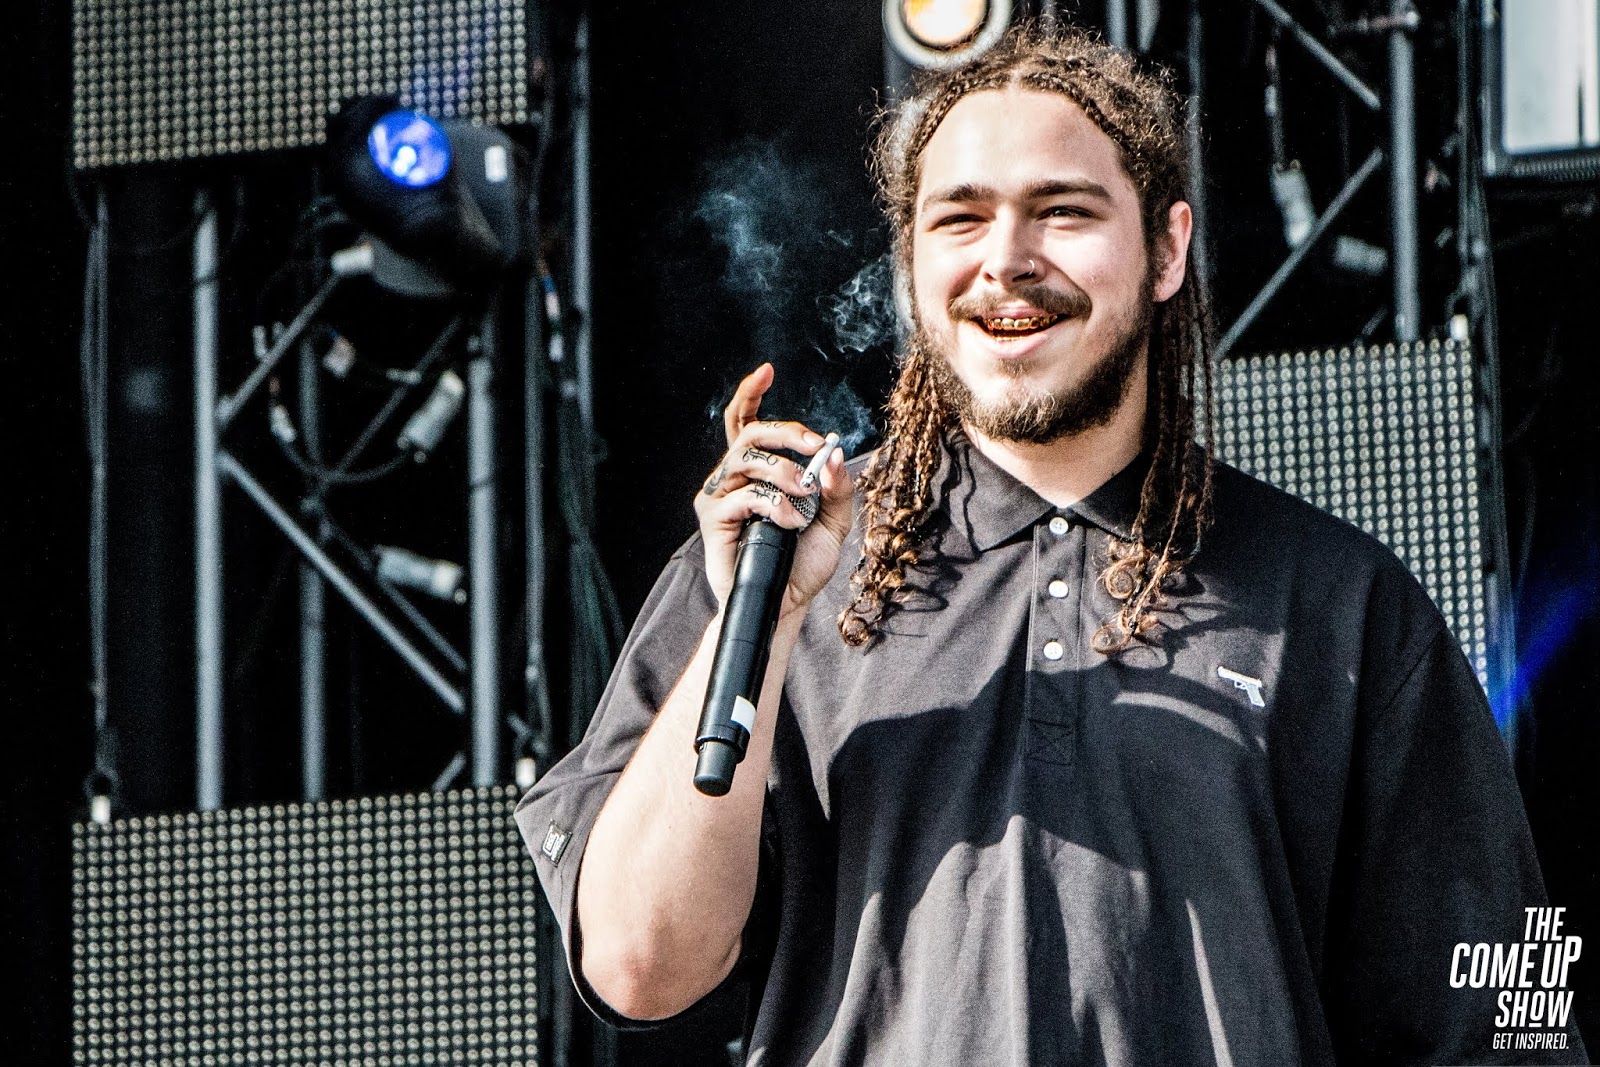 Mixer builds custom carts for Post Malone to game - The Techee